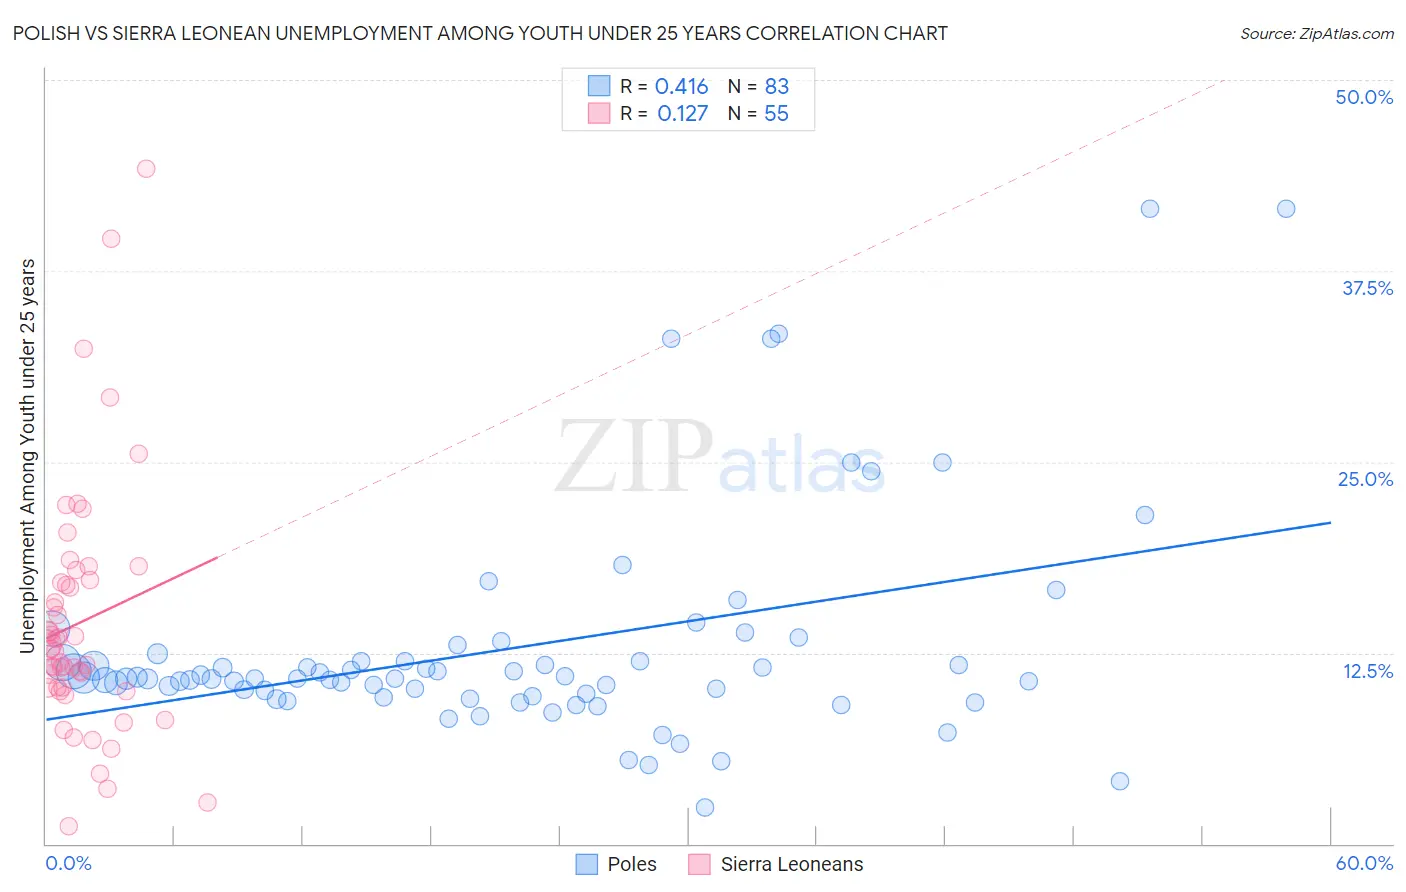 Polish vs Sierra Leonean Unemployment Among Youth under 25 years